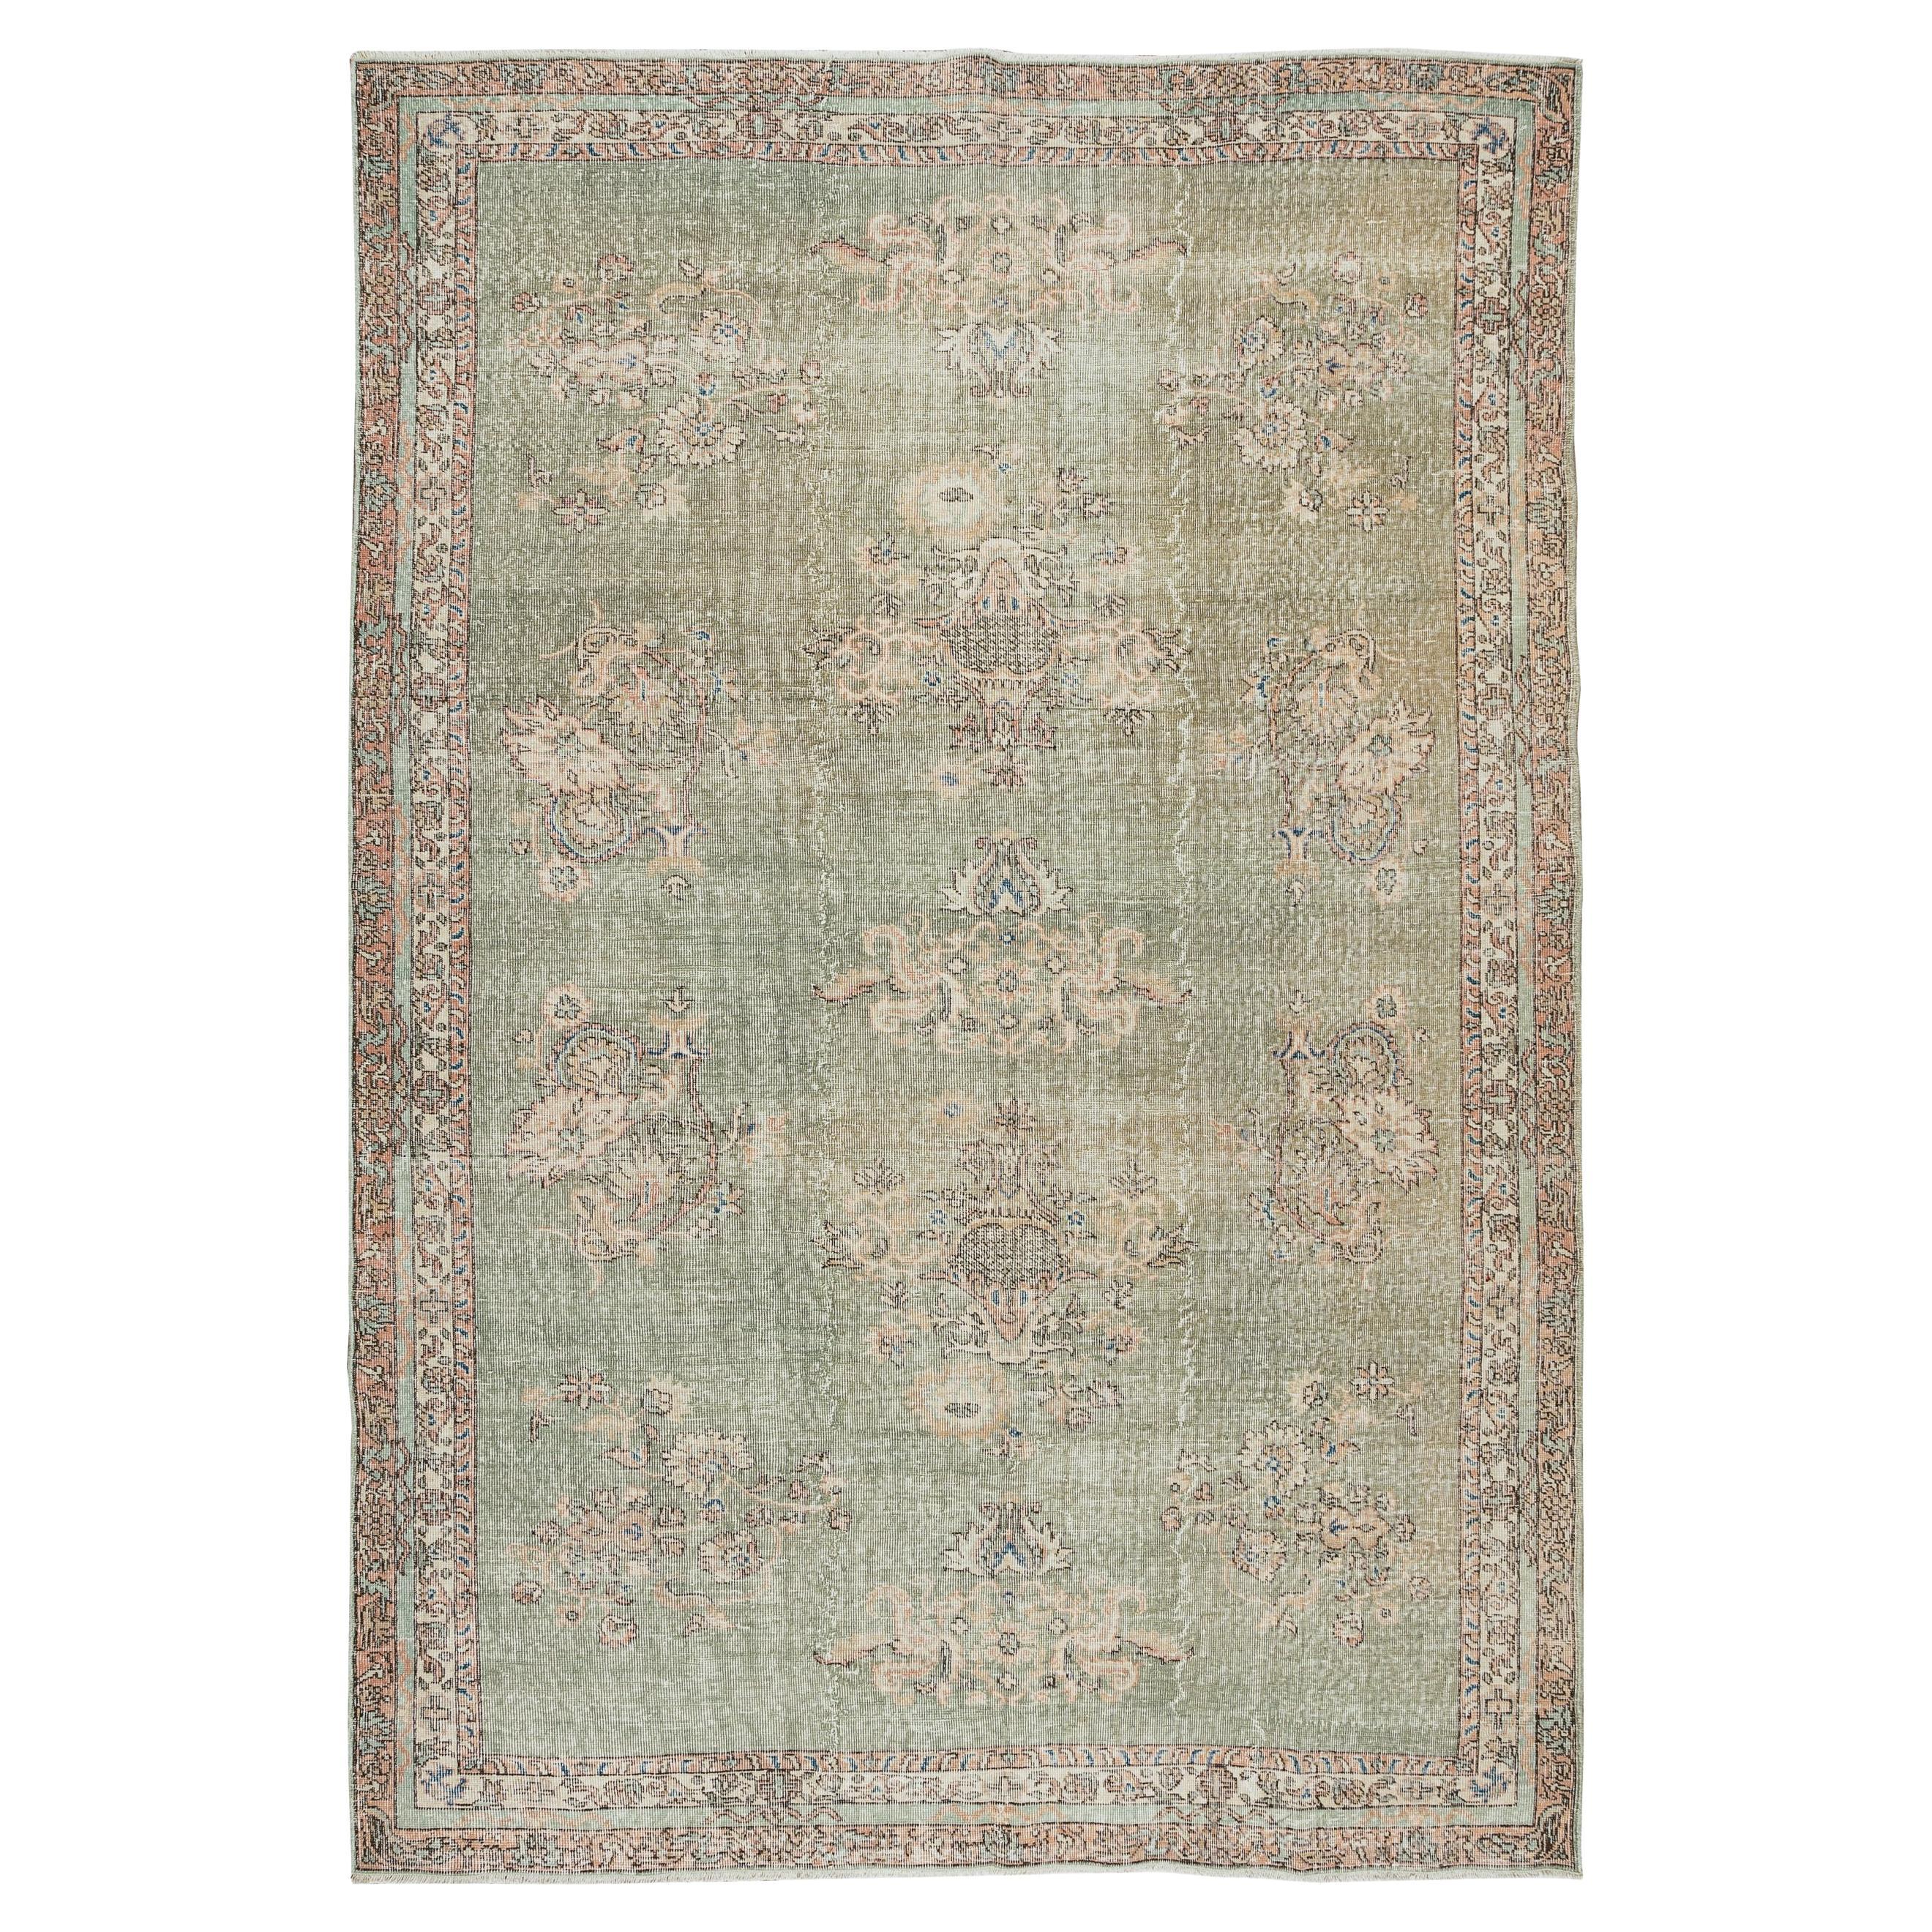 6.7x10 Ft Vintage Floral Pattern Handmade Turkish Area Rug in Shades of Green For Sale